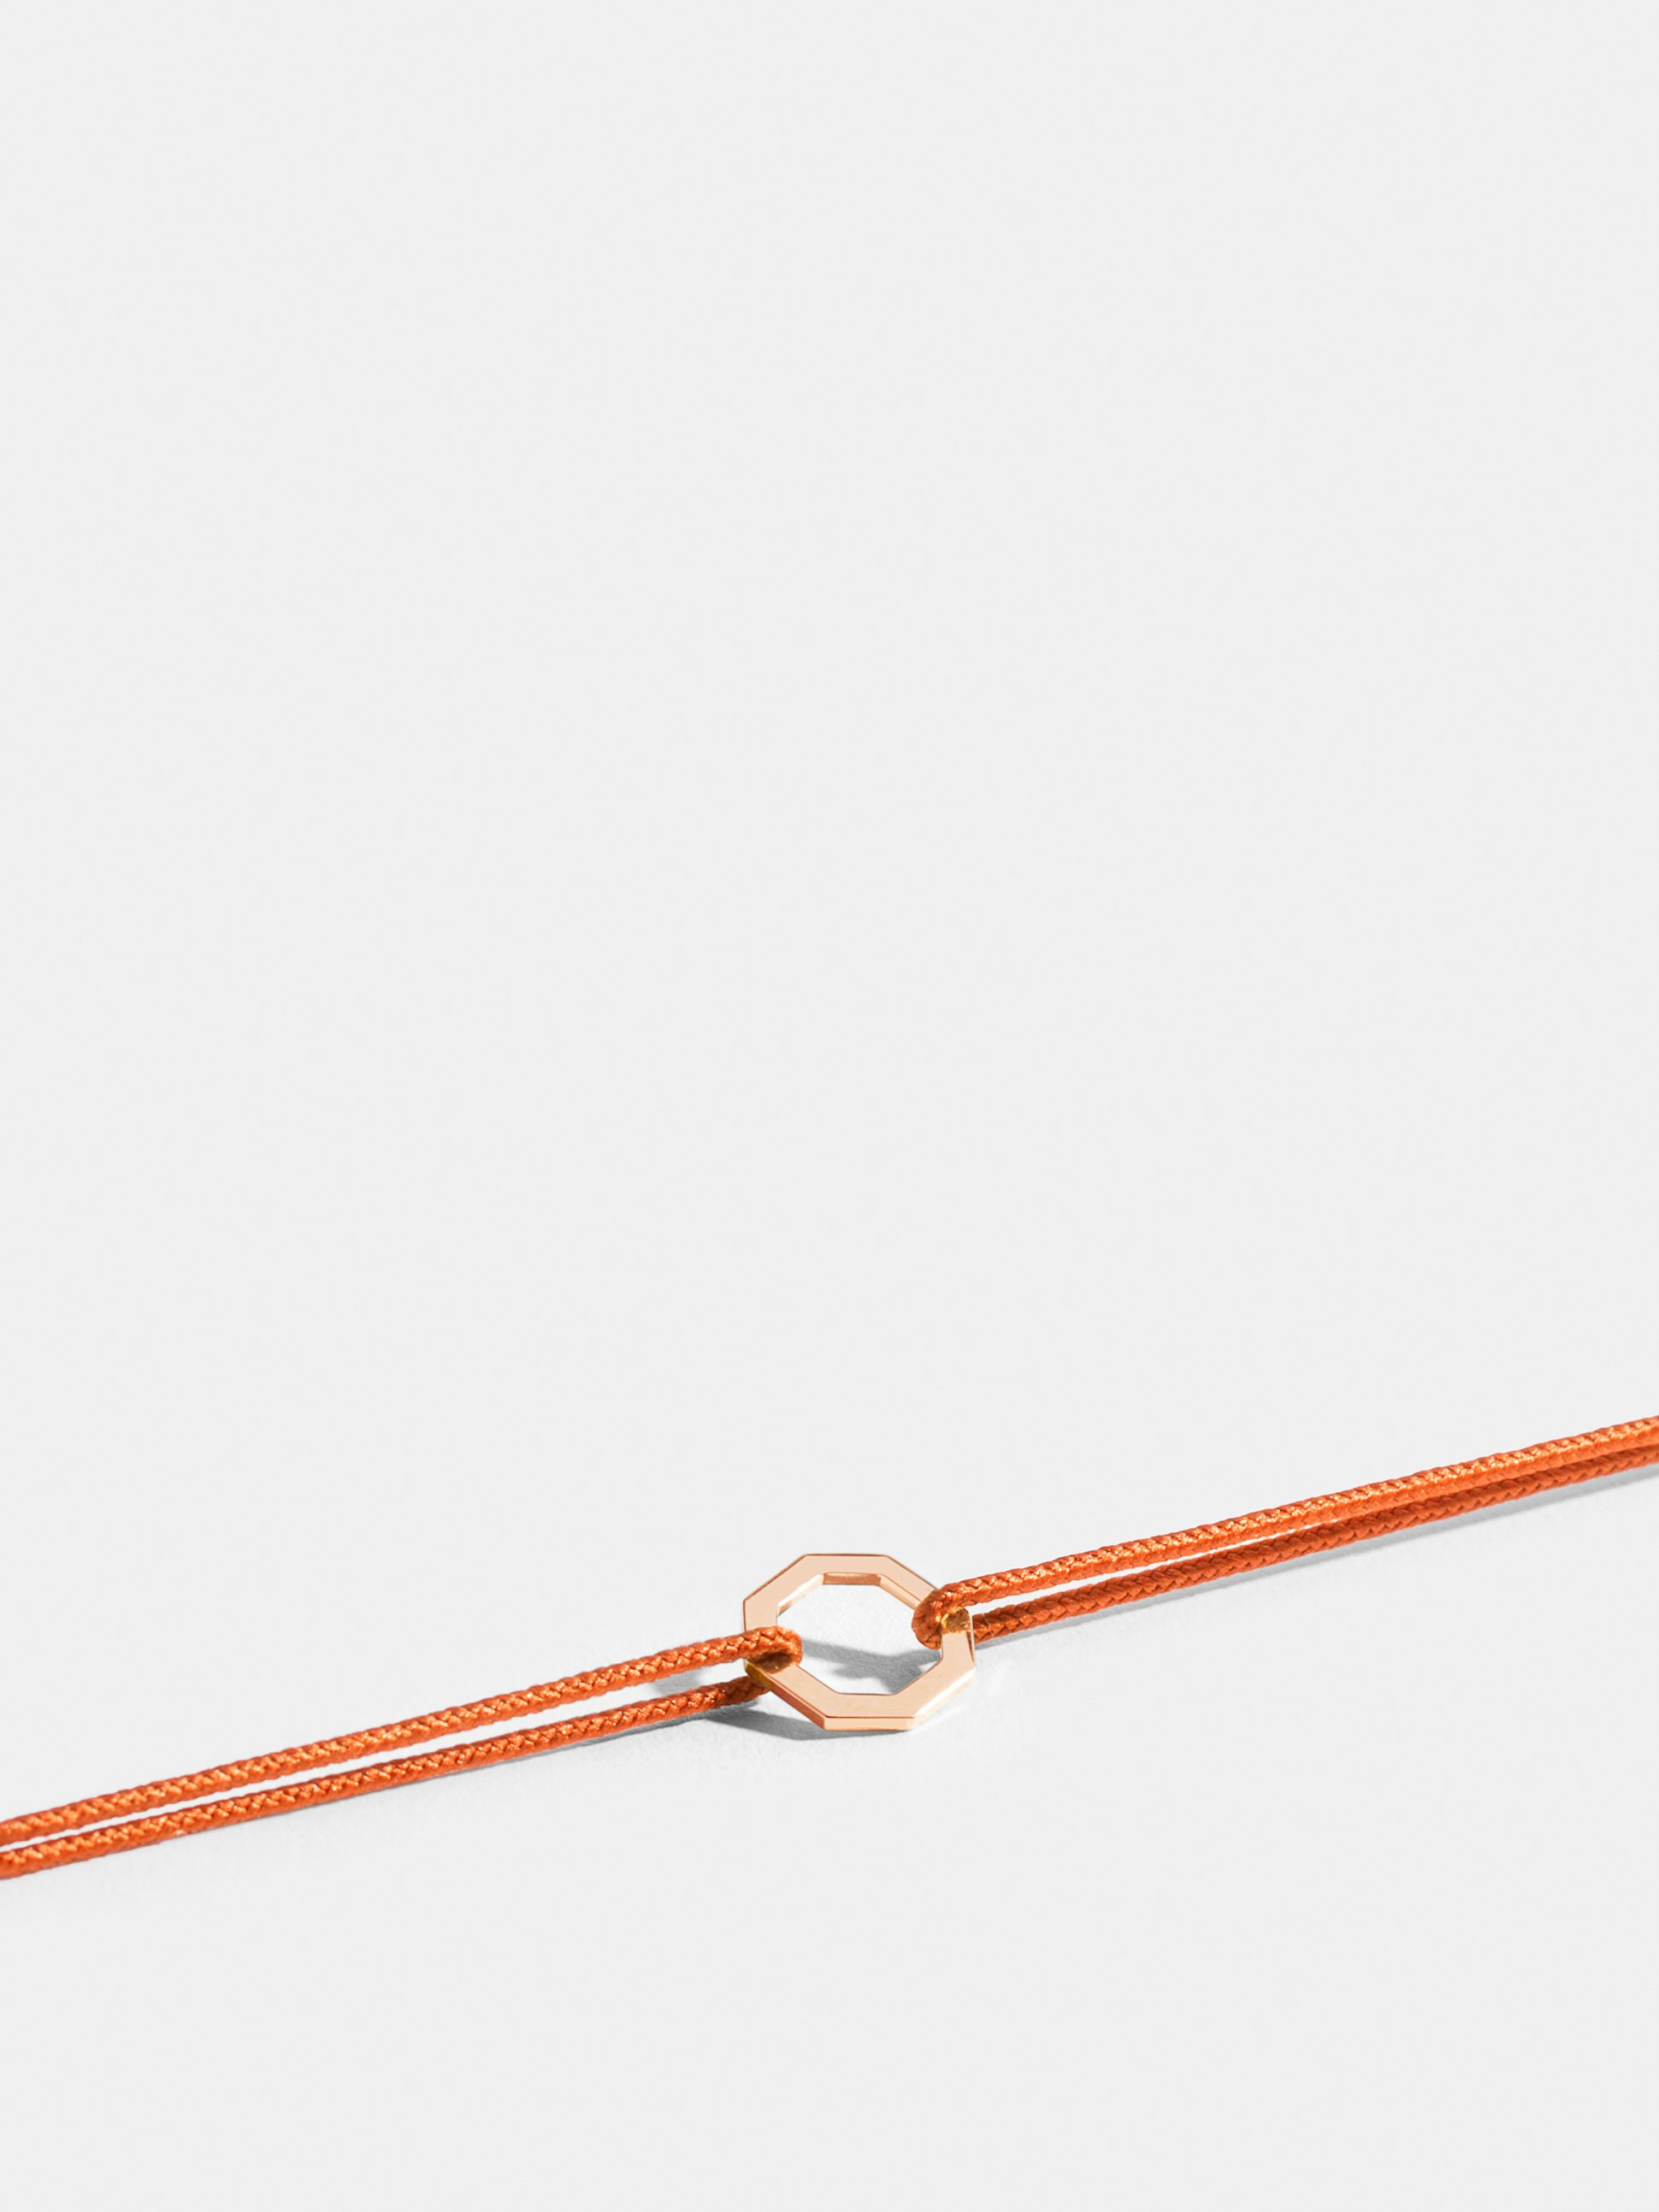 Octogone motif in 18k Fairmined ethical rose gold, on a bright orange cord. 